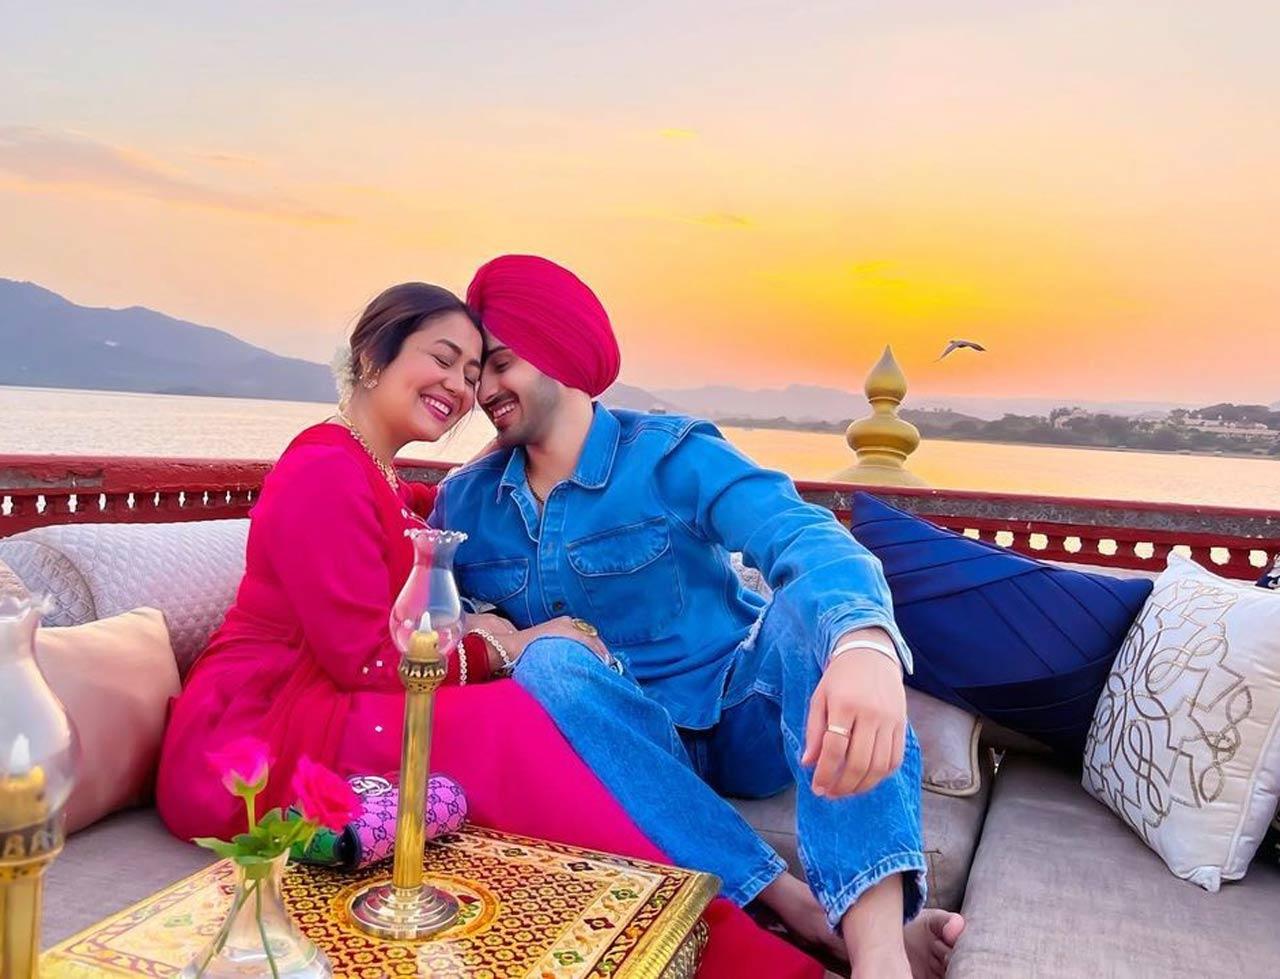 Neha Kakkar and Rohanpreet Singh struck a beautiful pose against the backdrop of an equally beautiful background. So what was the occasion? Neha Kakkar wrote- 